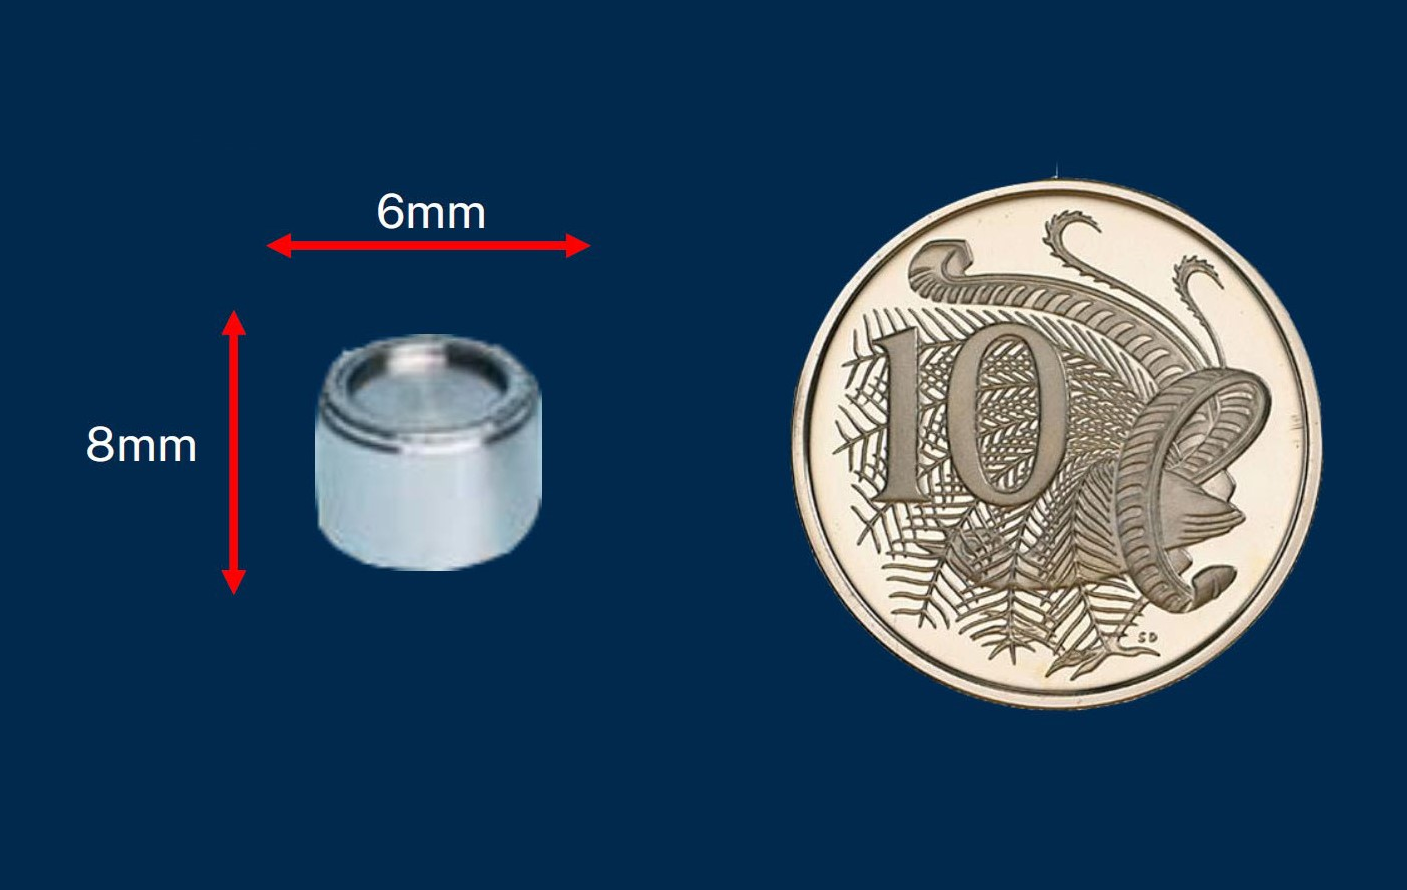 A small silver capsule is placed next to a 10c coin to compare the sizes.